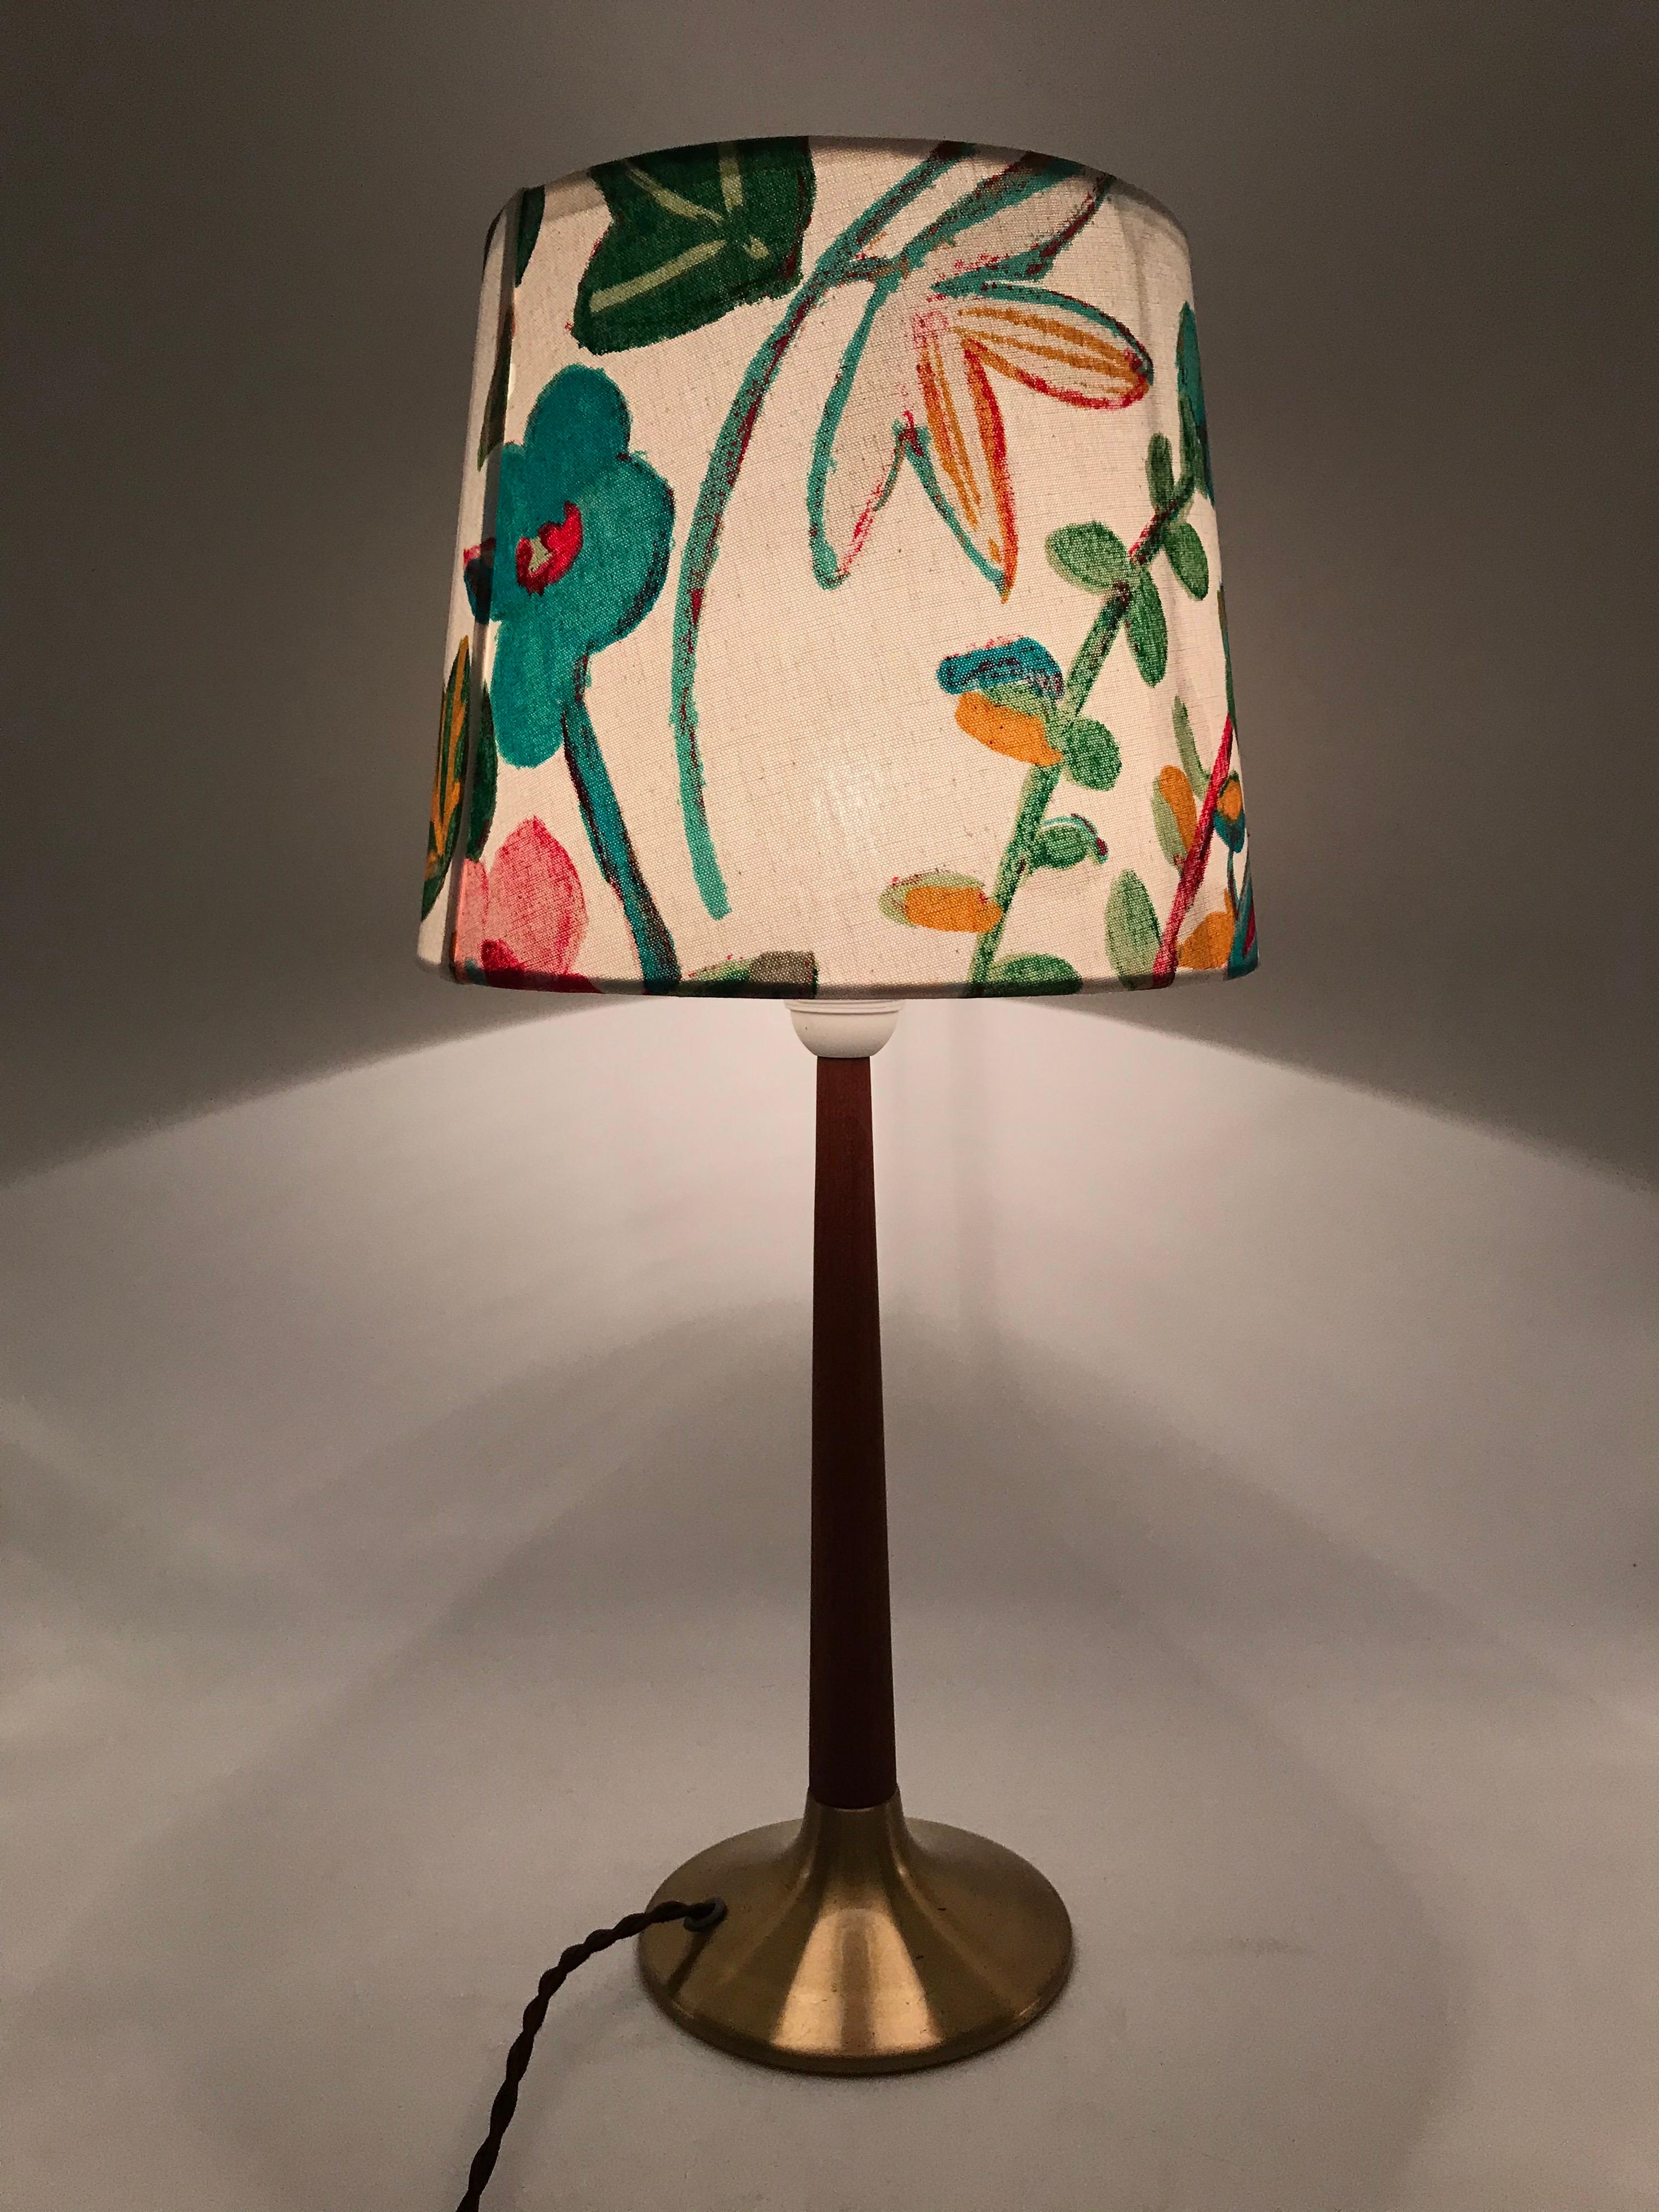 Vintage Holm Sørensen Table Lamp from the 1950s In Good Condition For Sale In Søborg, DK